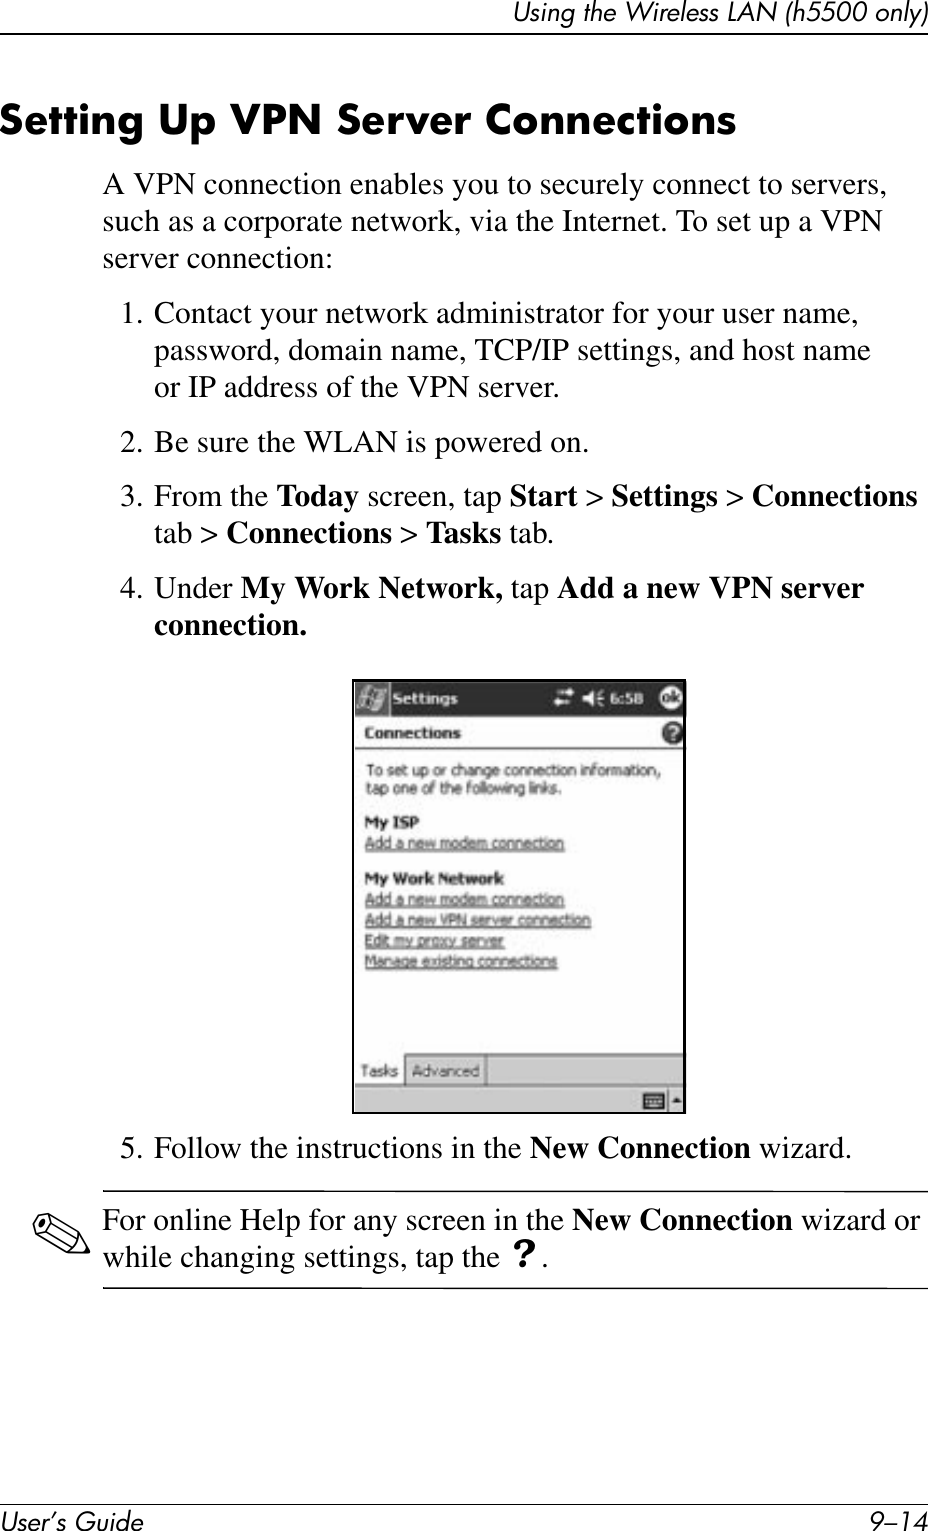 User’s Guide 9–14Using the Wireless LAN (h5500 only)Setting Up VPN Server ConnectionsA VPN connection enables you to securely connect to servers, such as a corporate network, via the Internet. To set up a VPN server connection:1. Contact your network administrator for your user name, password, domain name, TCP/IP settings, and host name or IP address of the VPN server.2. Be sure the WLAN is powered on.3. From the Today screen, tap Start &gt; Settings &gt; Connections tab &gt; Connections &gt; Tasks tab.4. Under My Work Network, tap Add a new VPN server connection.5. Follow the instructions in the New Connection wizard.✎For online Help for any screen in the New Connection wizard or while changing settings, tap the ? .